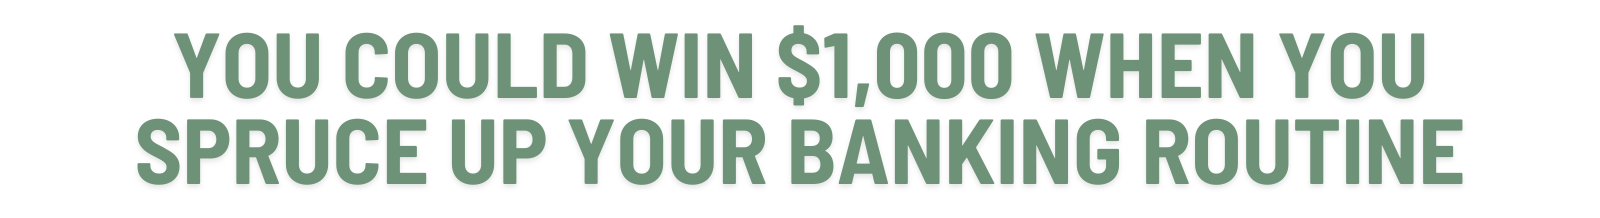 You could win $1,000 when you spruce up your banking routine.